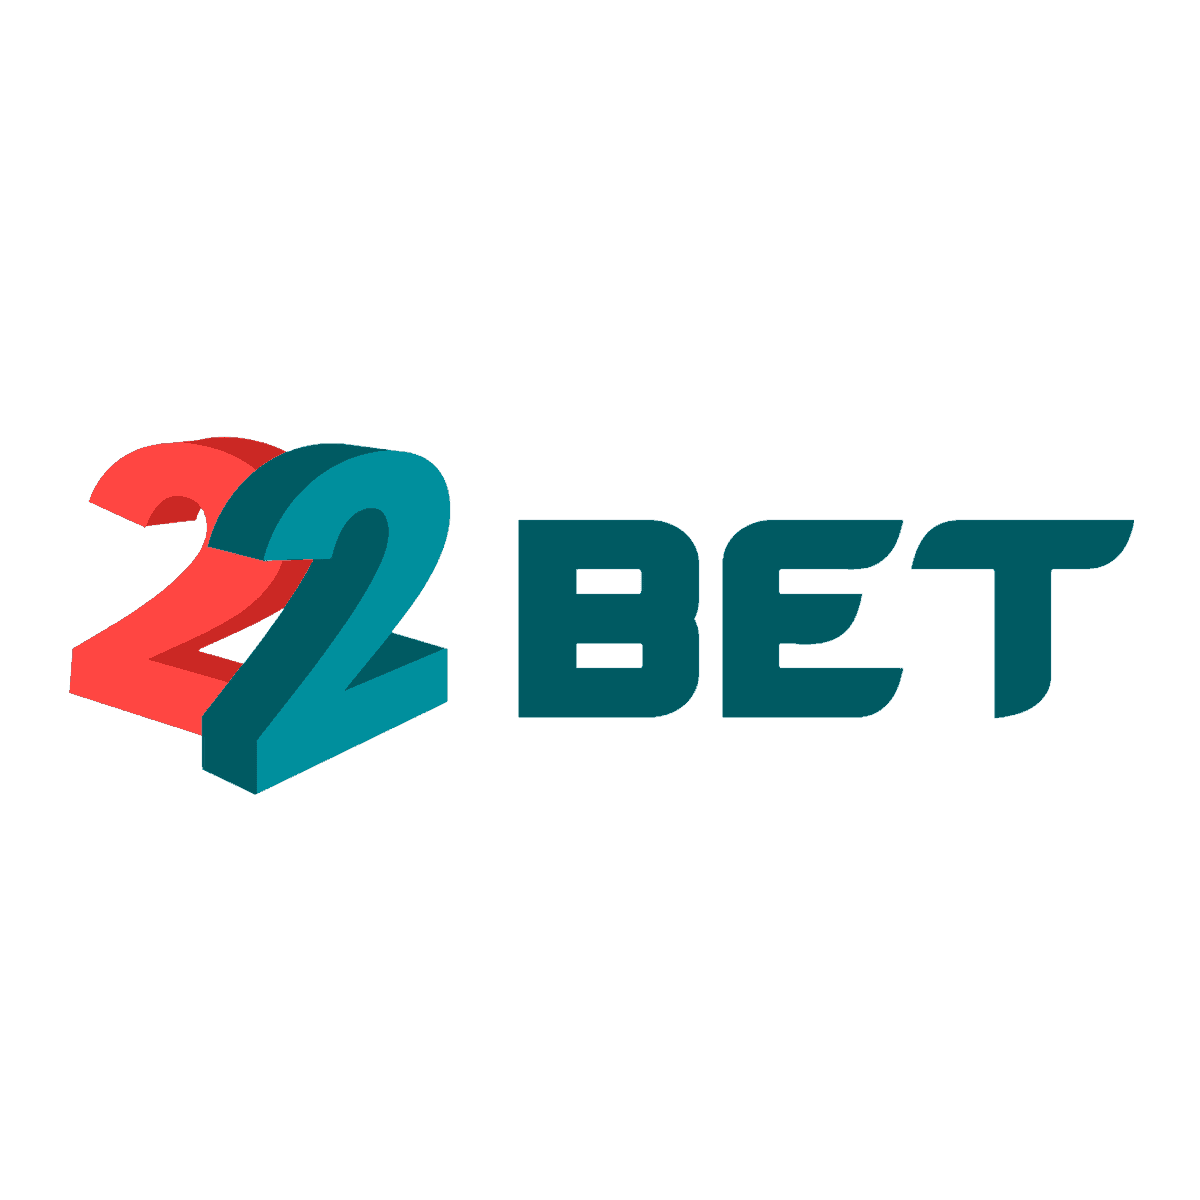 How To Quit 22bet casino In 5 Days